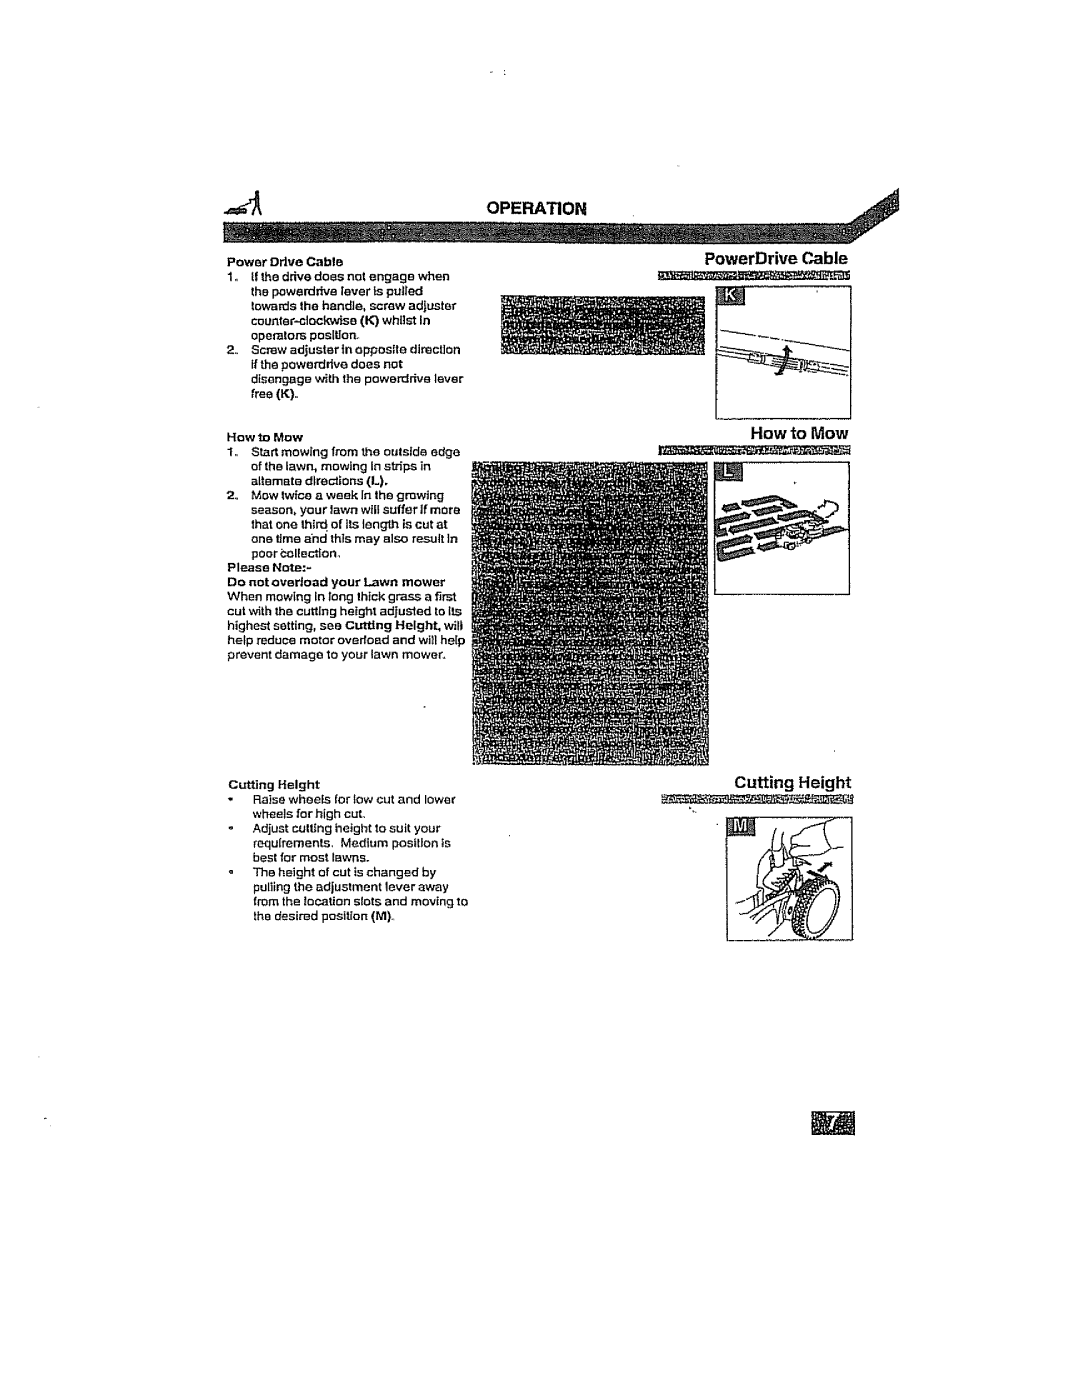 Craftsman 917.38919 owner manual Operation, PowerDrive Cable Howto Mow Cutting Height 